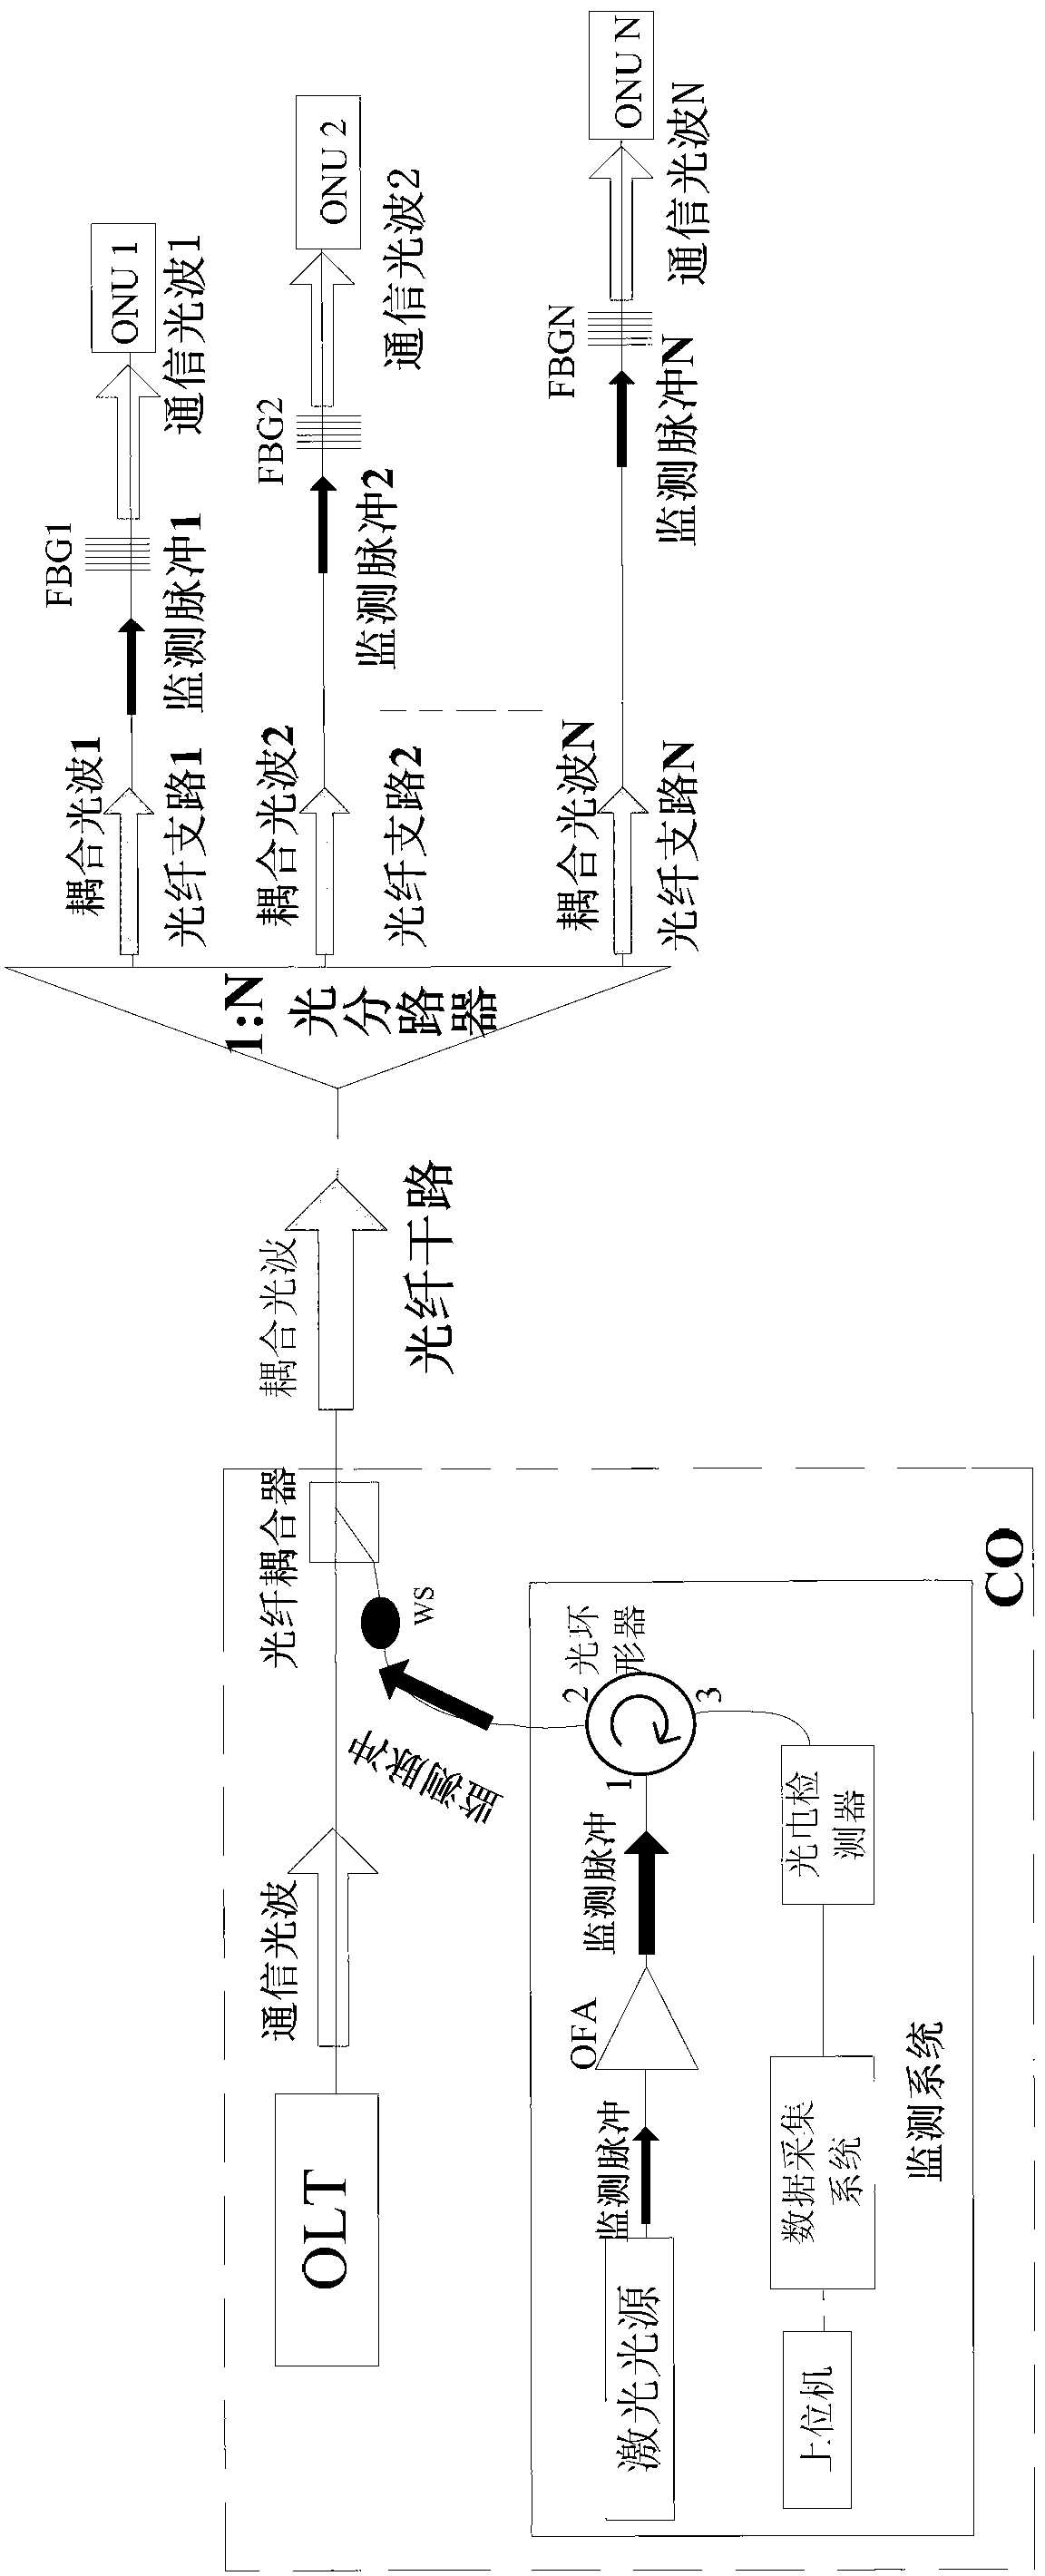 PON (passive optical network) line fault monitoring method and device based on optical mark method